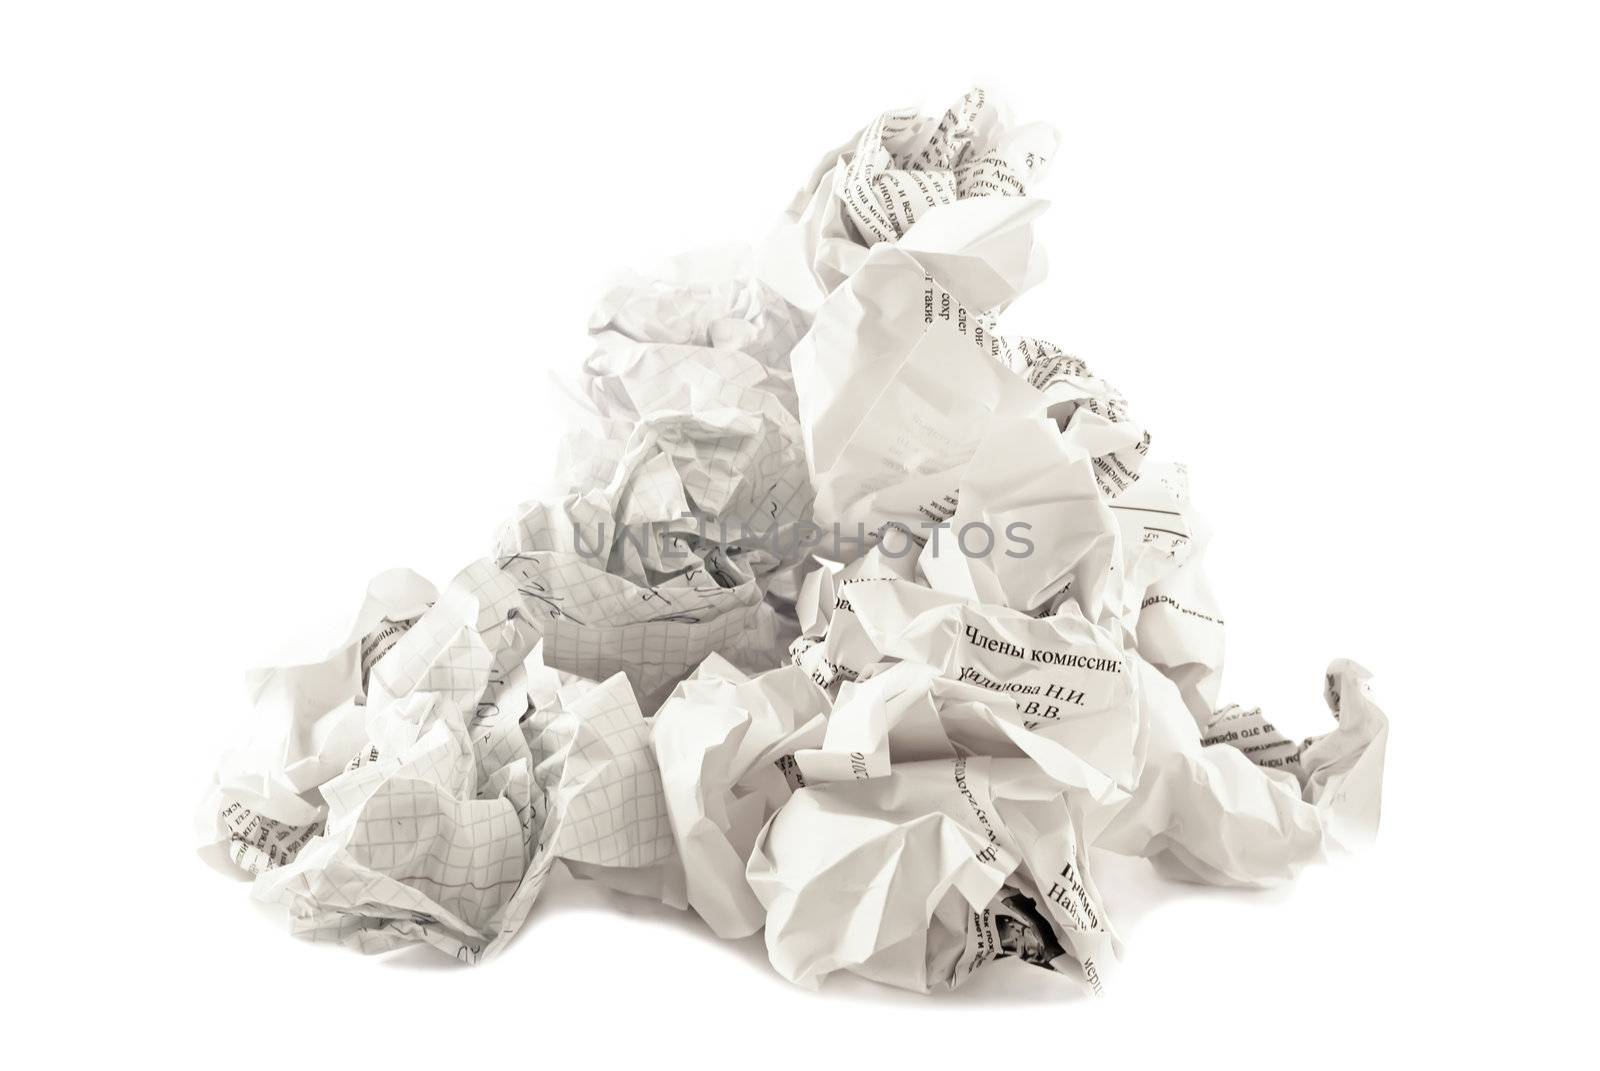 The heap of papers crumpled by Diversphoto